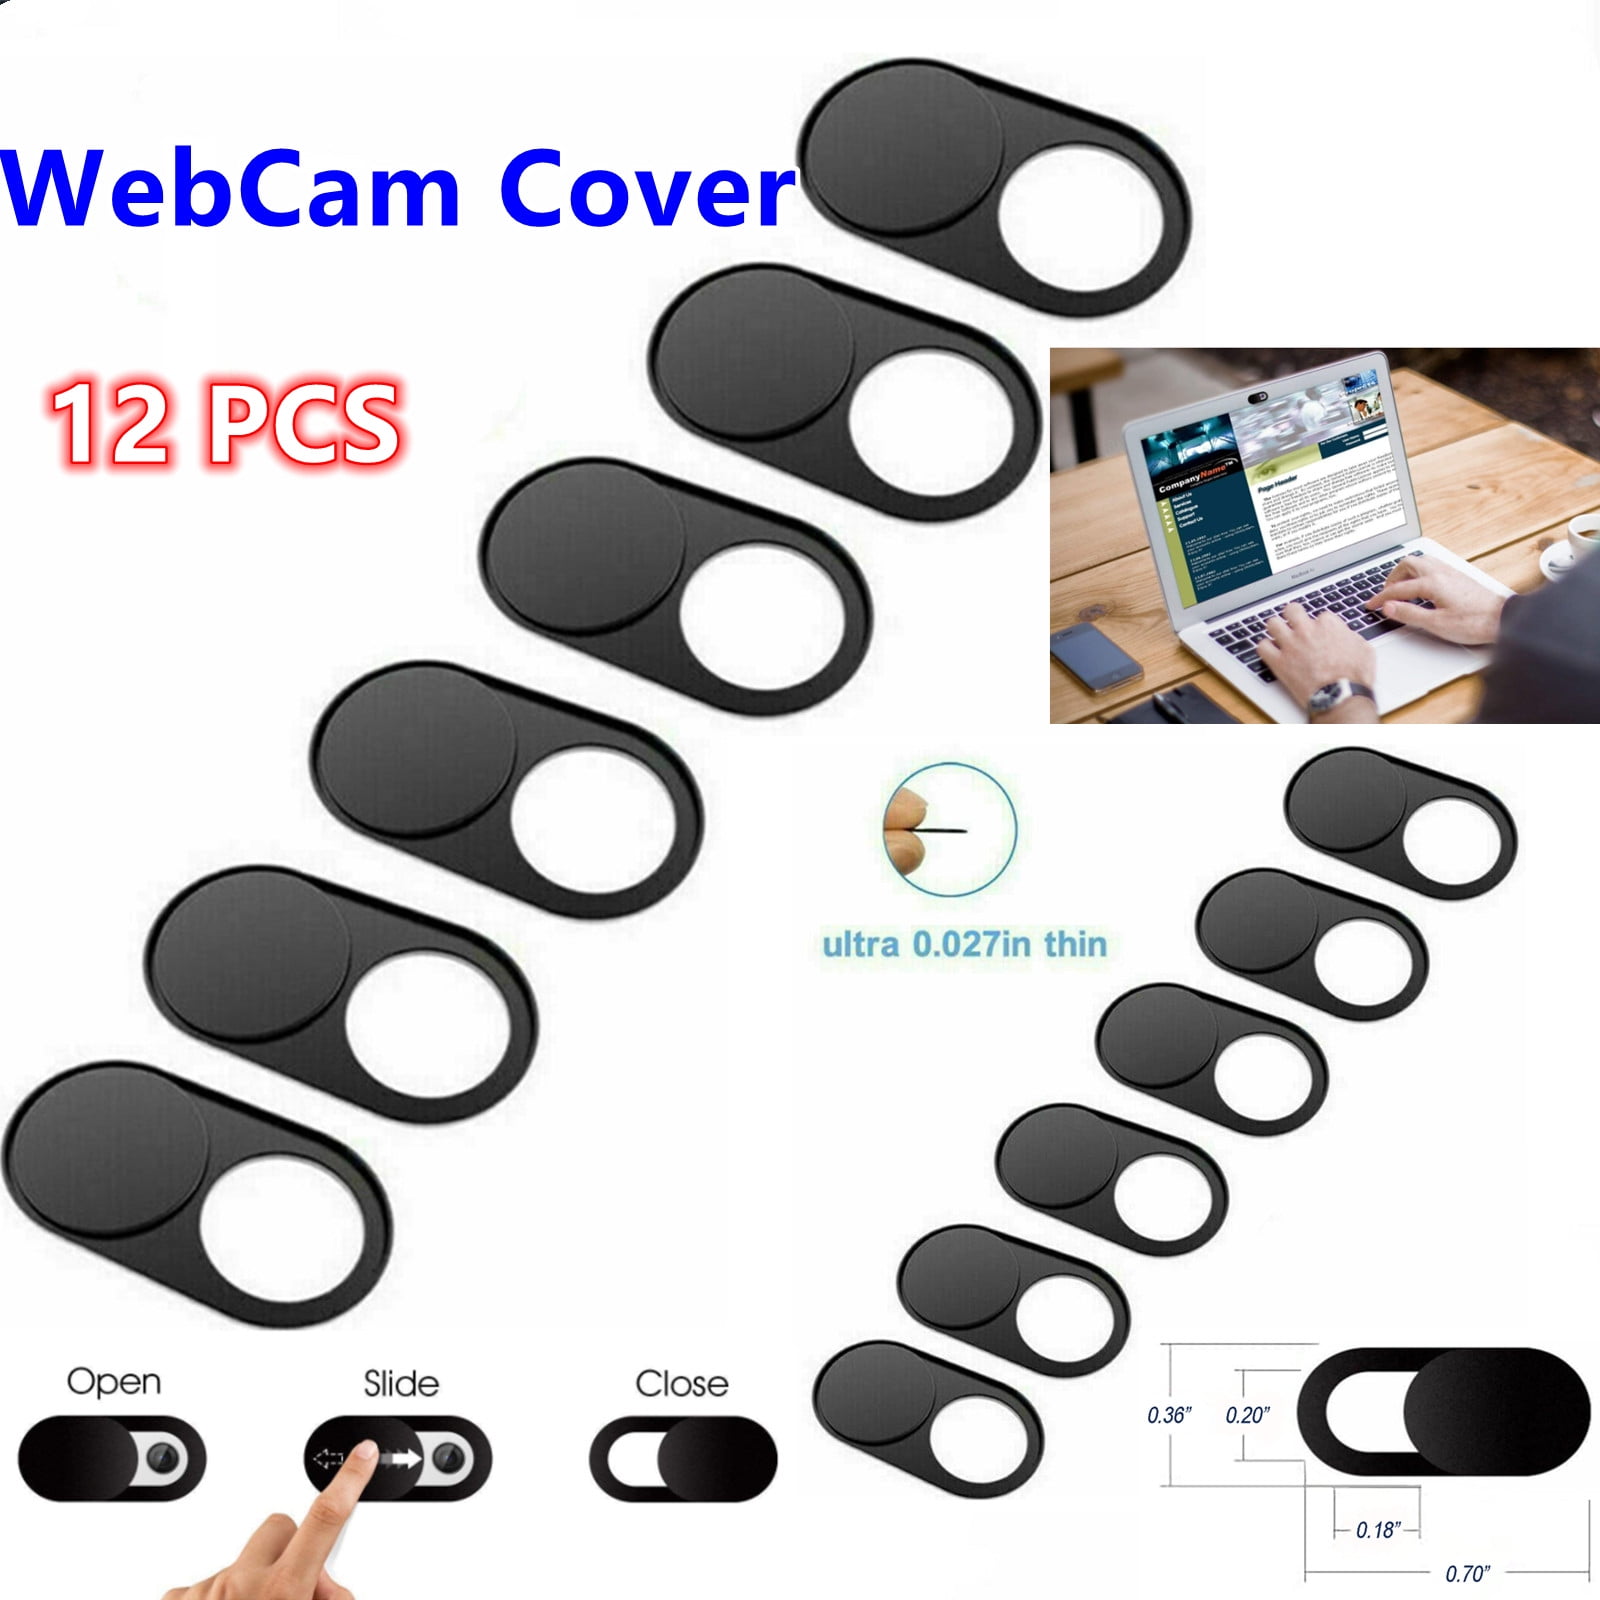 Laptop Camera Cover Slide 6 Pack Ultra Thin Privacy Camera Cover Slide Fits Most Laptop Desktop PC Tablet Smartphone Webcam Cover Phone Camera Cover Animal Pattern 